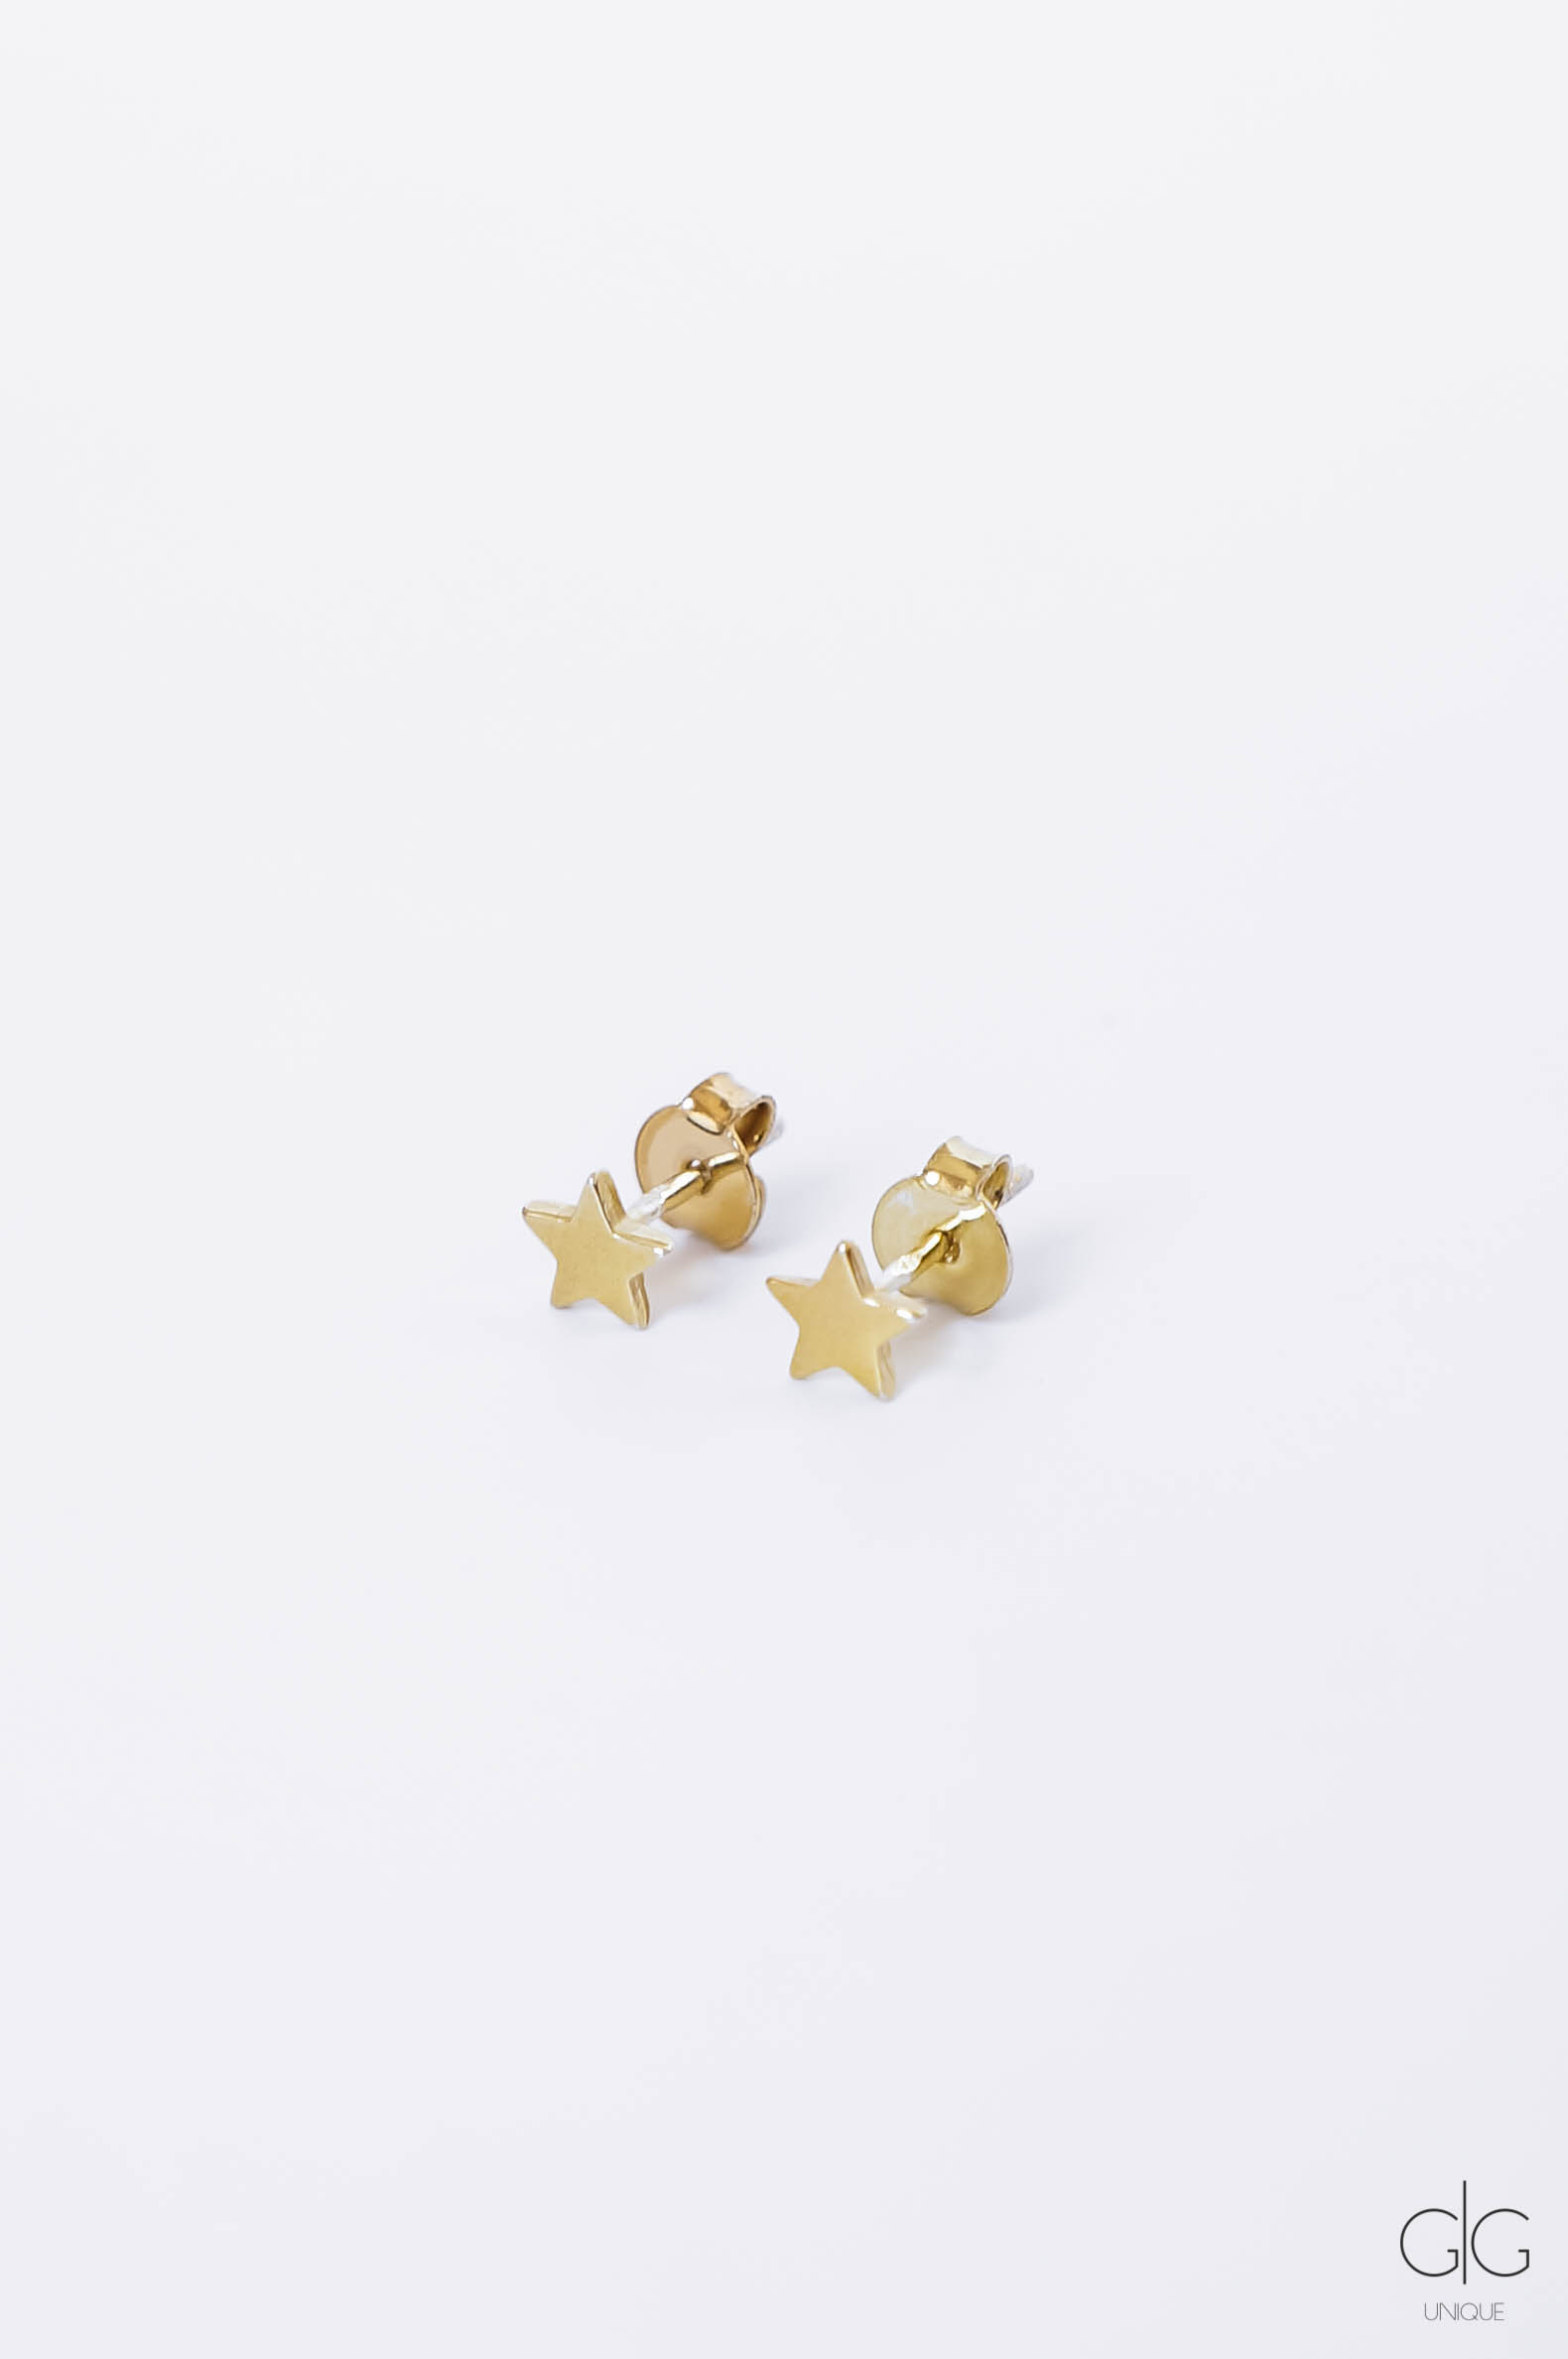 Gold-plated silver mini star earrings - GG Unique